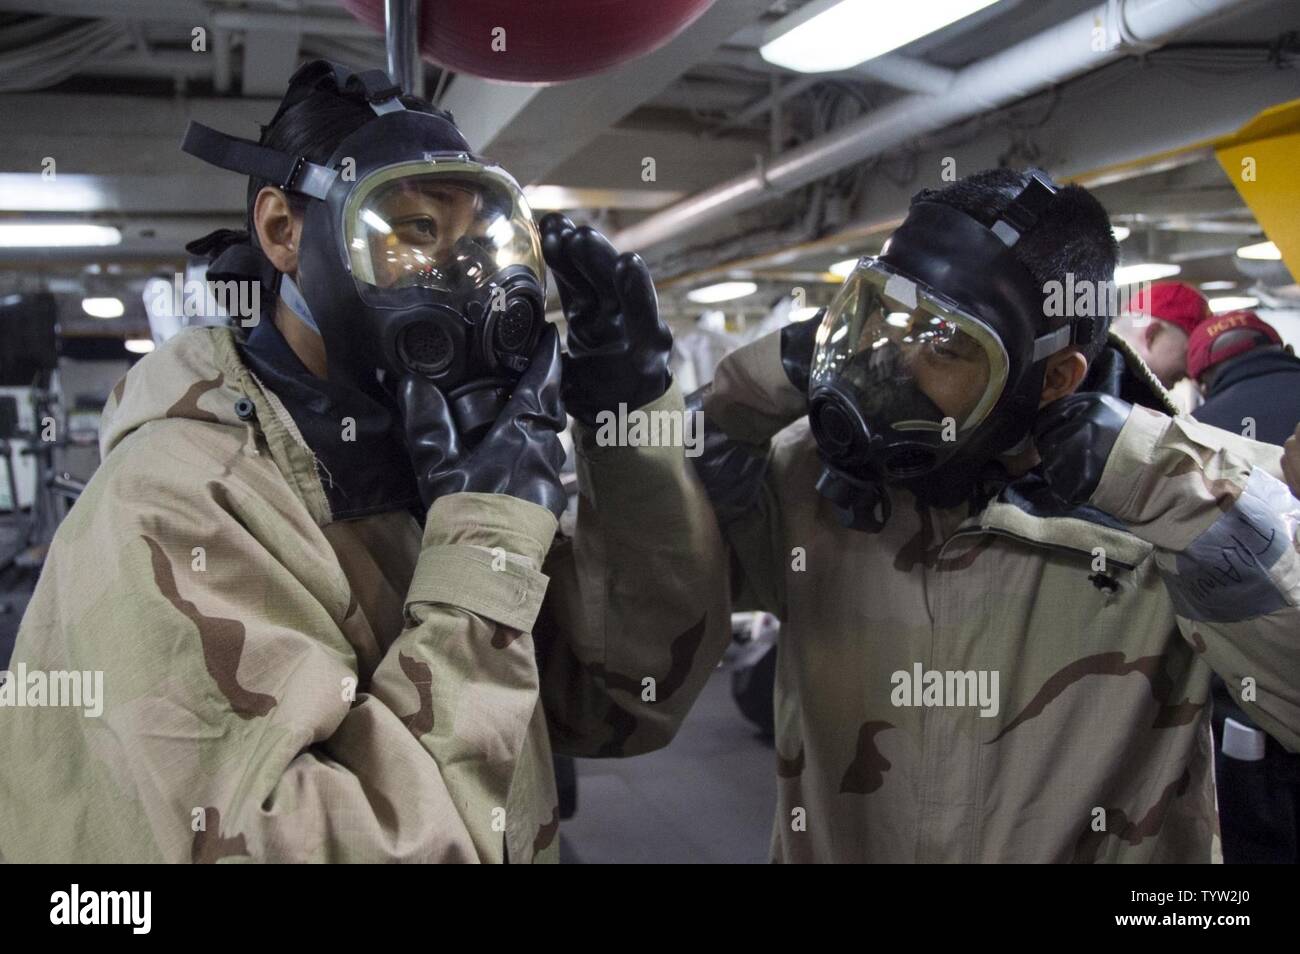 SASEBO, Japan (Nov. 30, 2016) Petty Officer 3rd Class Laniece Watters  (left), from Columbus, Ohio, and Petty Officer 2nd Class David Sacdal, from  San Francisco, Calif., don MCU-2P gas masks during a